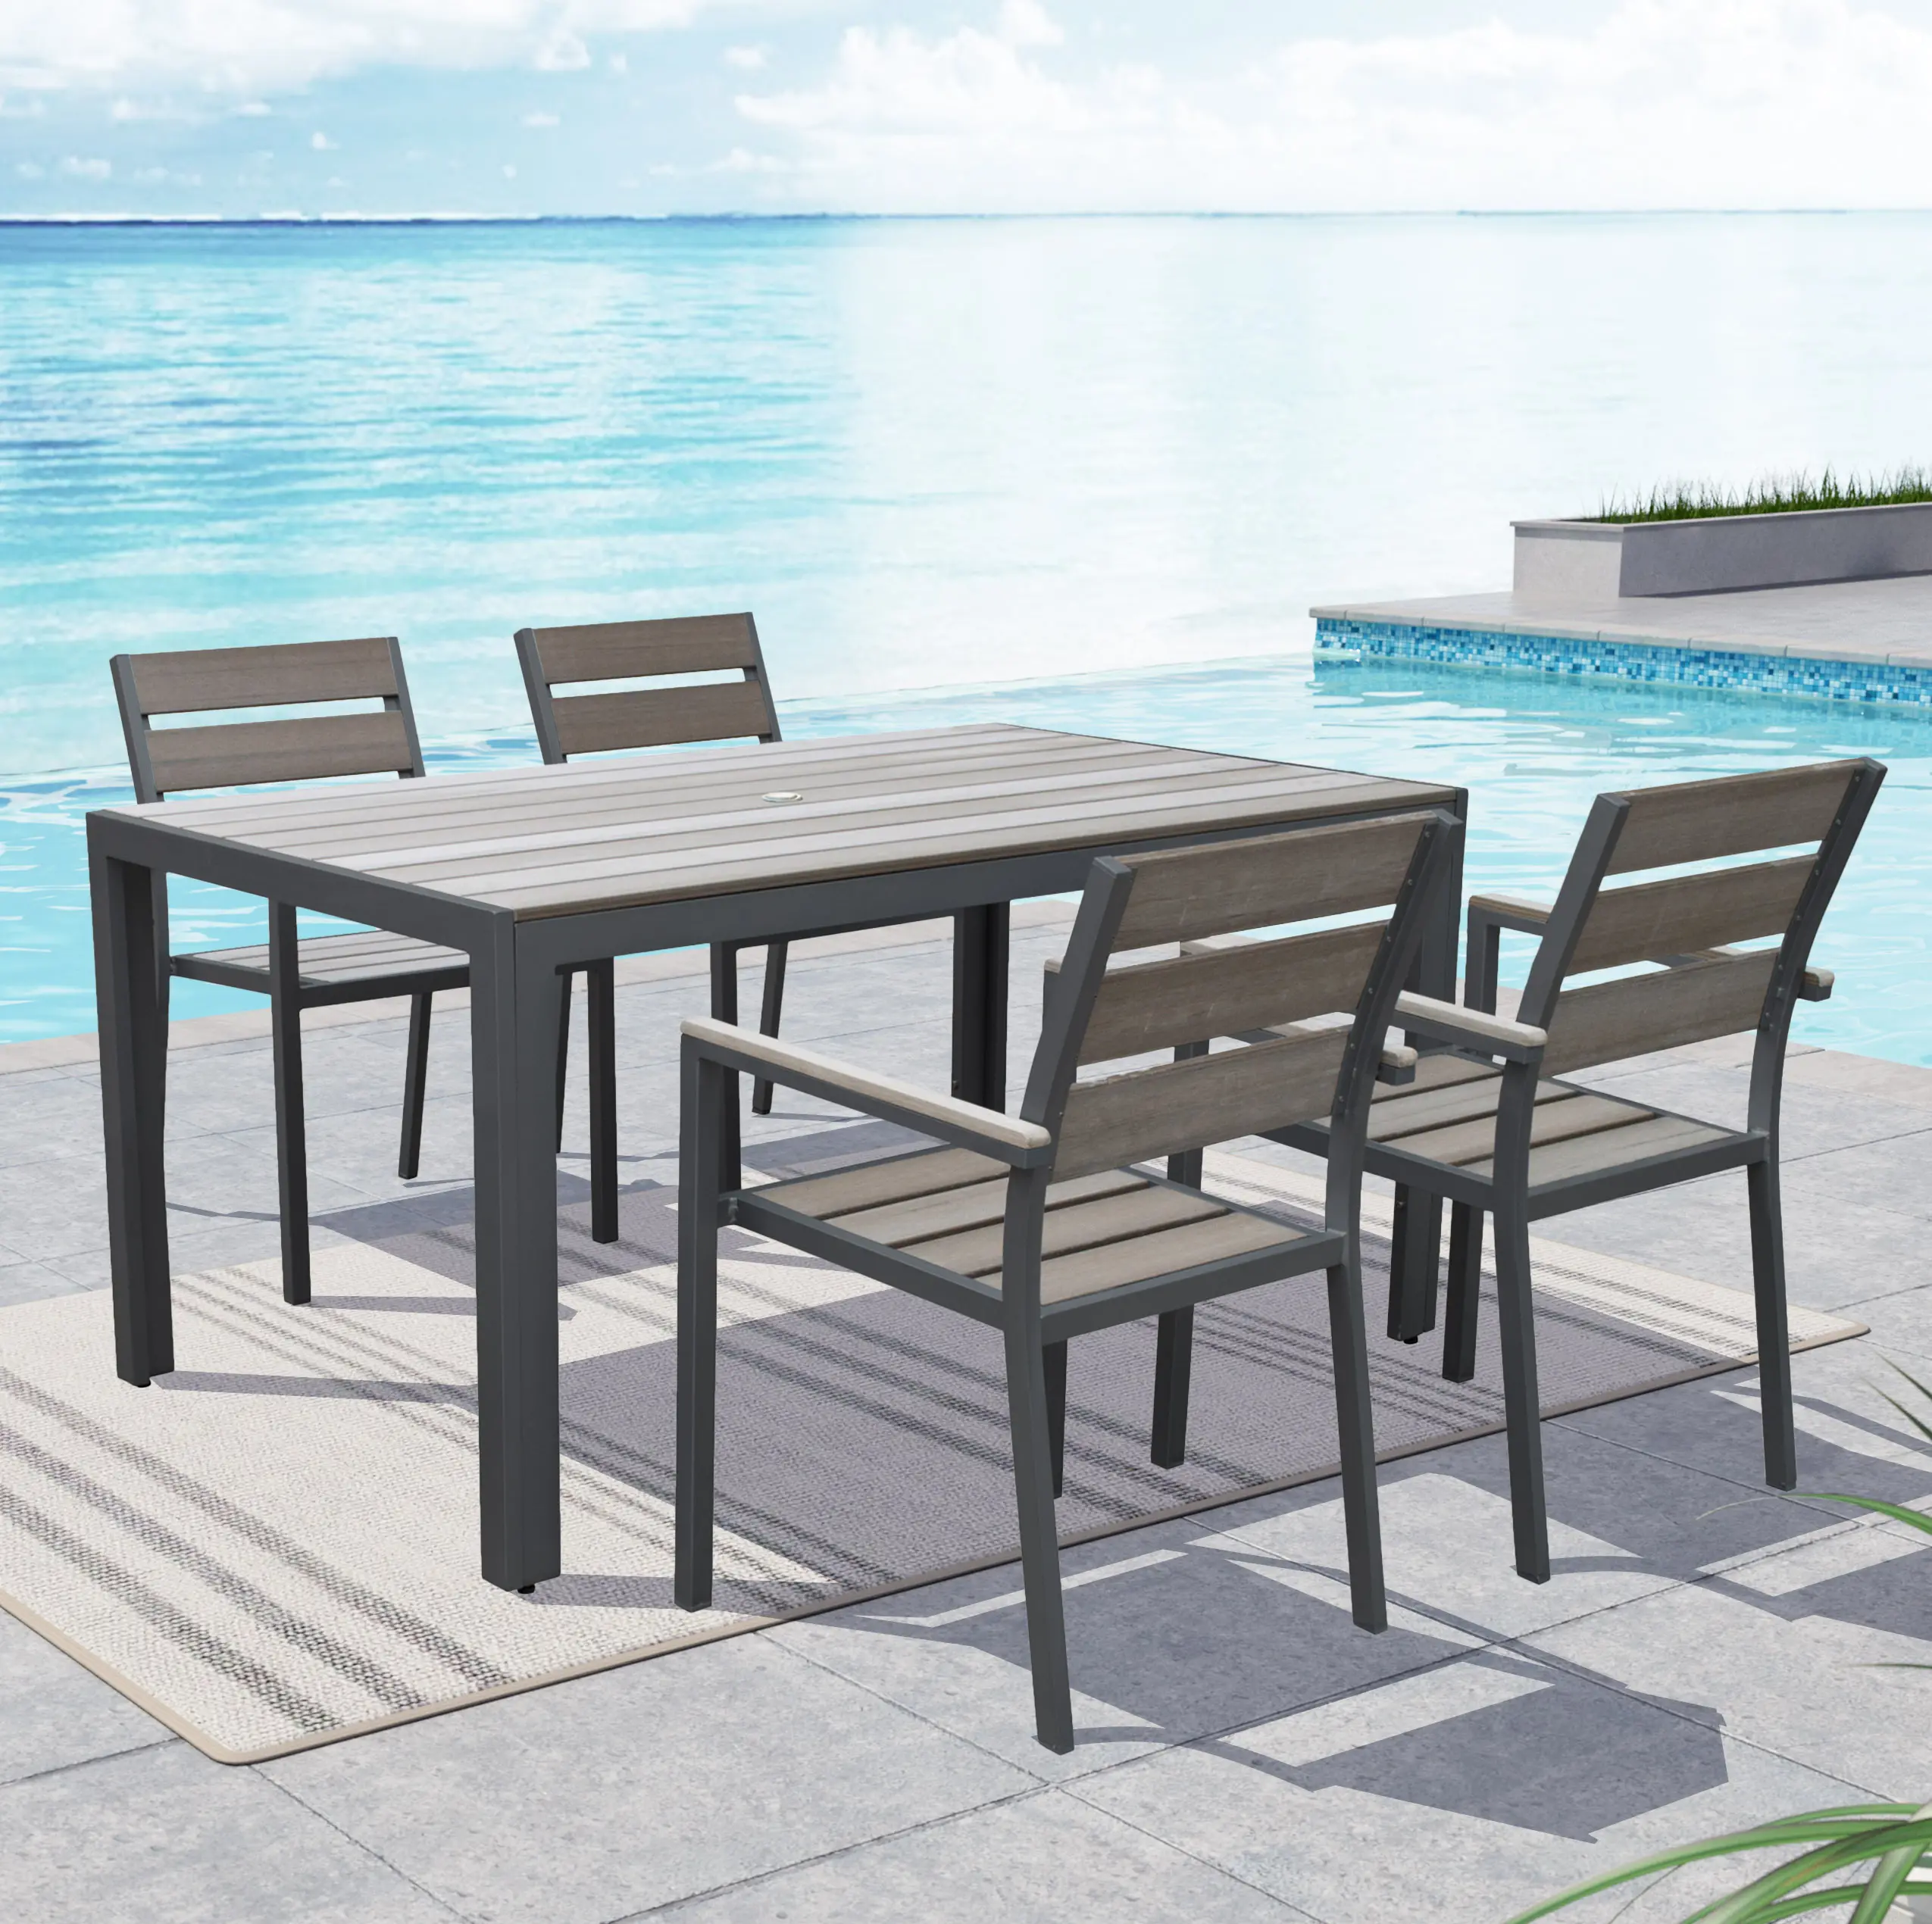 PJR-672-C Gallant Sun Bleached Black Outdoor Dining Chairs,  sku PJR-672-C